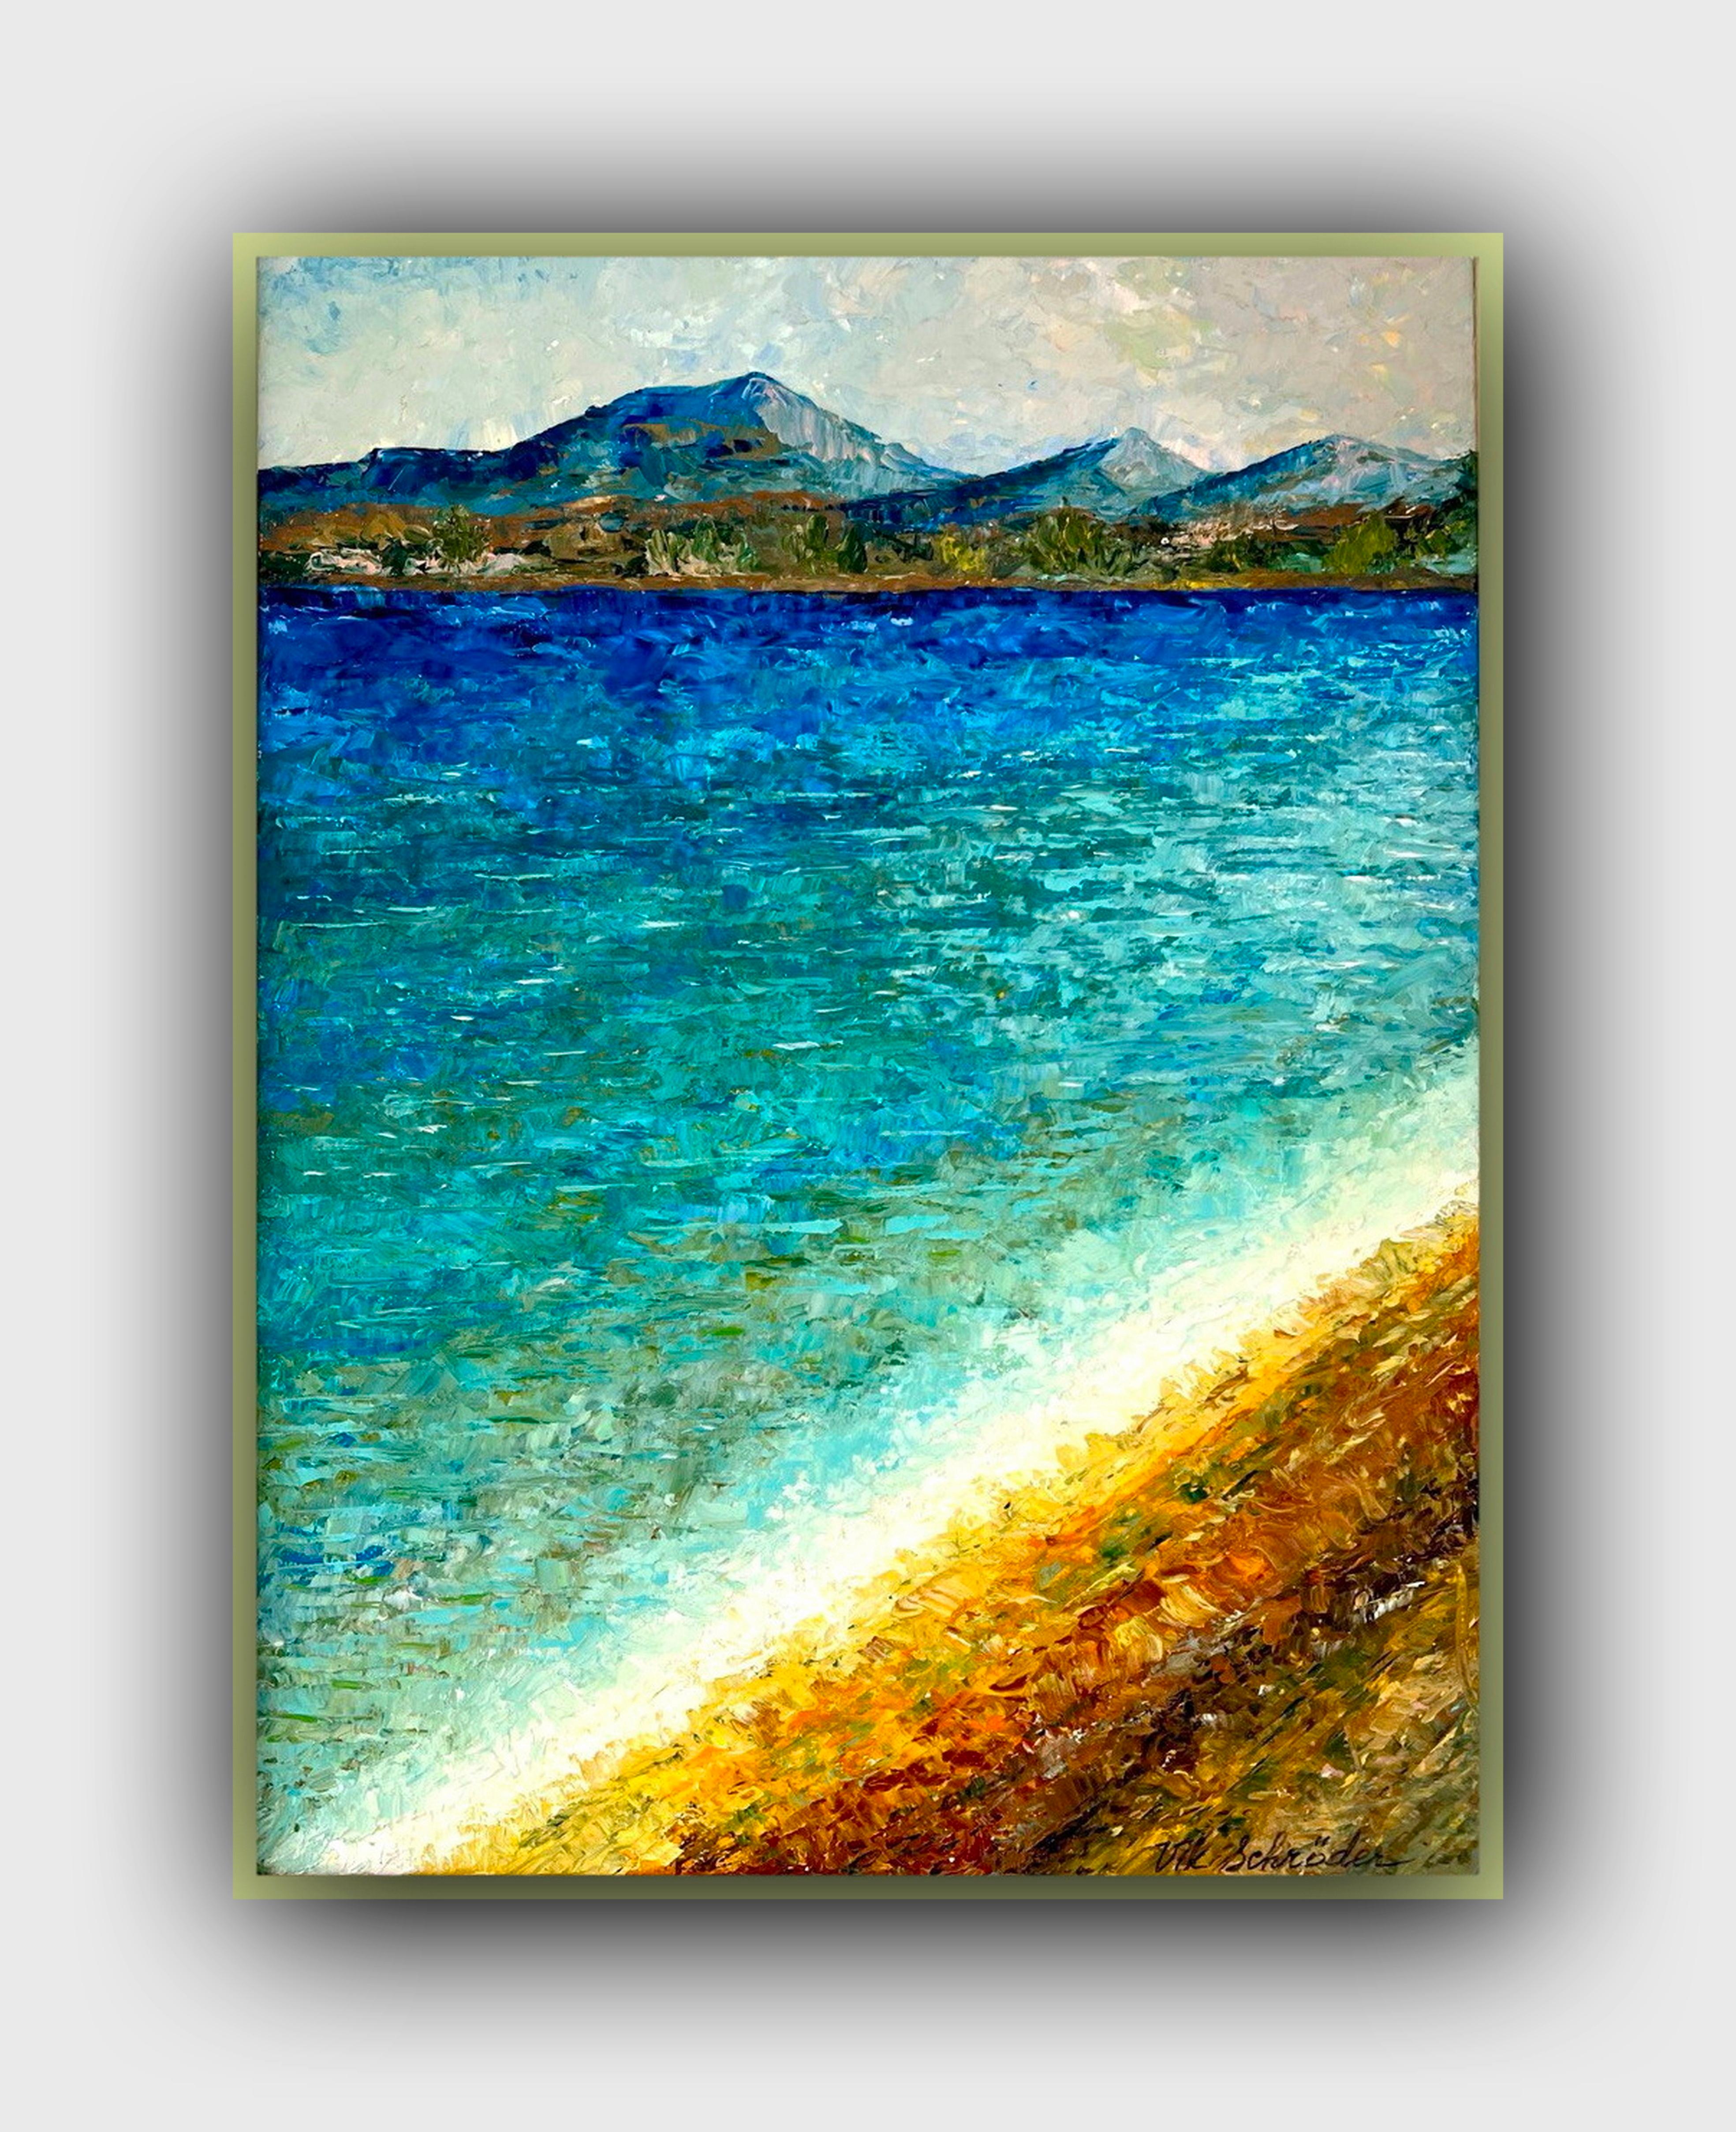 Impression of Montreux. Interior abstract oil painting. Impressionism style. 10